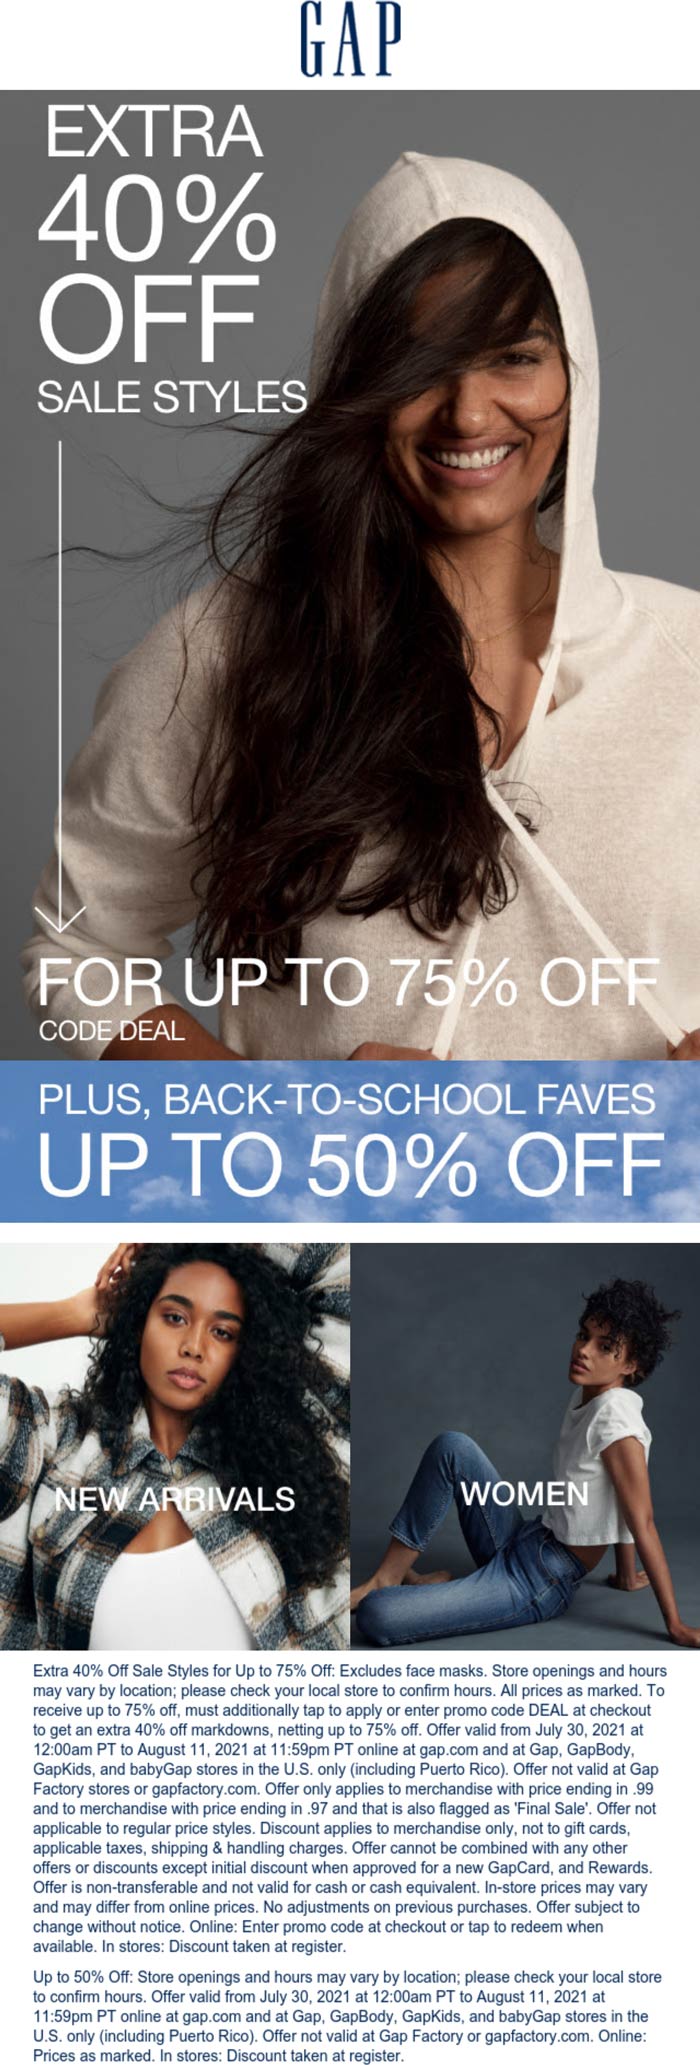 Gap coupons & promo code for [December 2022]